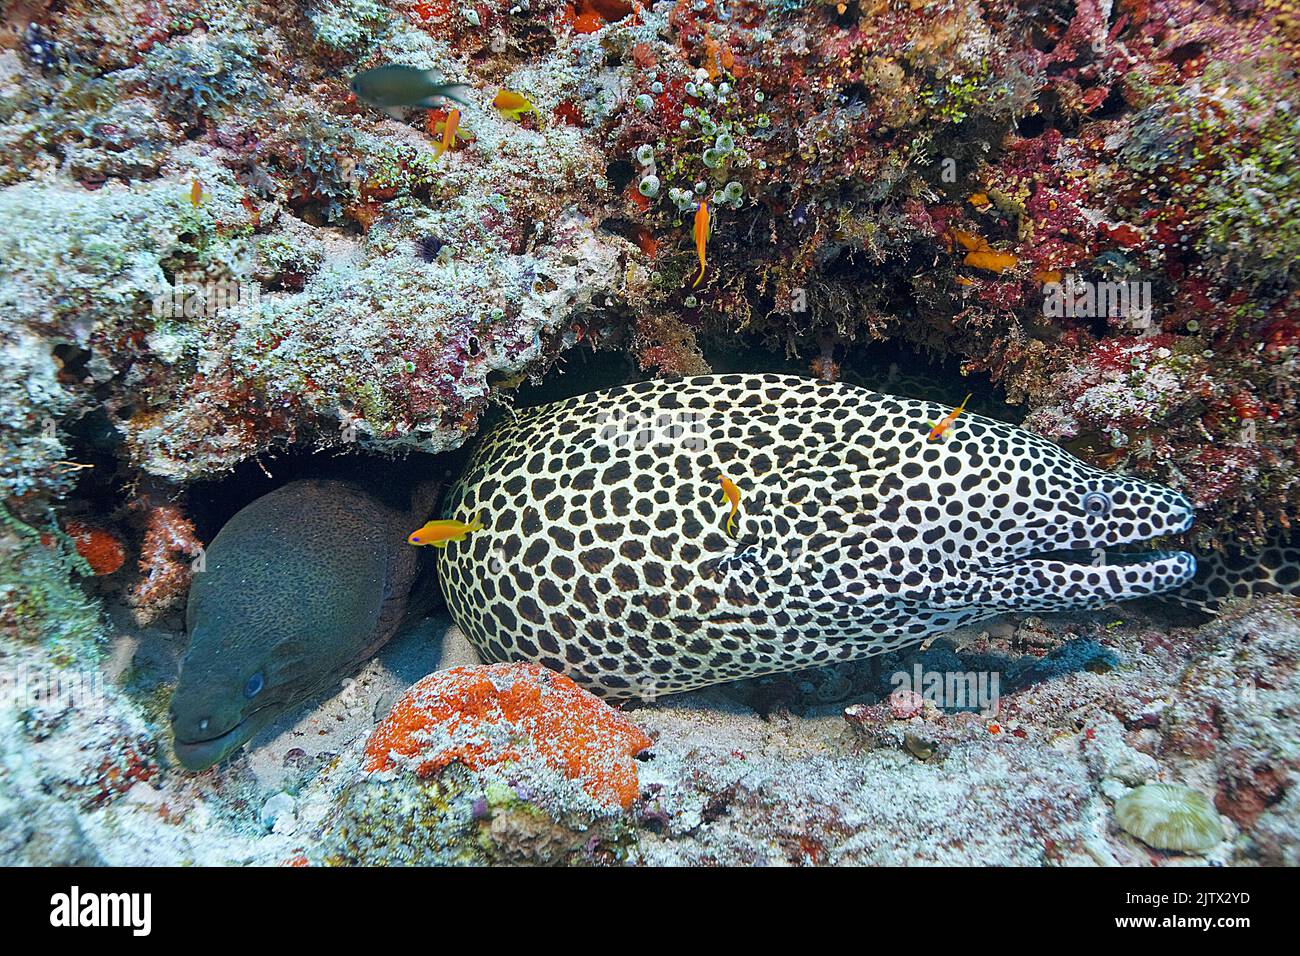 Honeycomb moray (Gymnothorax favagineus) and a Giant moray (Gymnothorax javanicus), living together, Maldives, Indian ocean, Asia Stock Photo